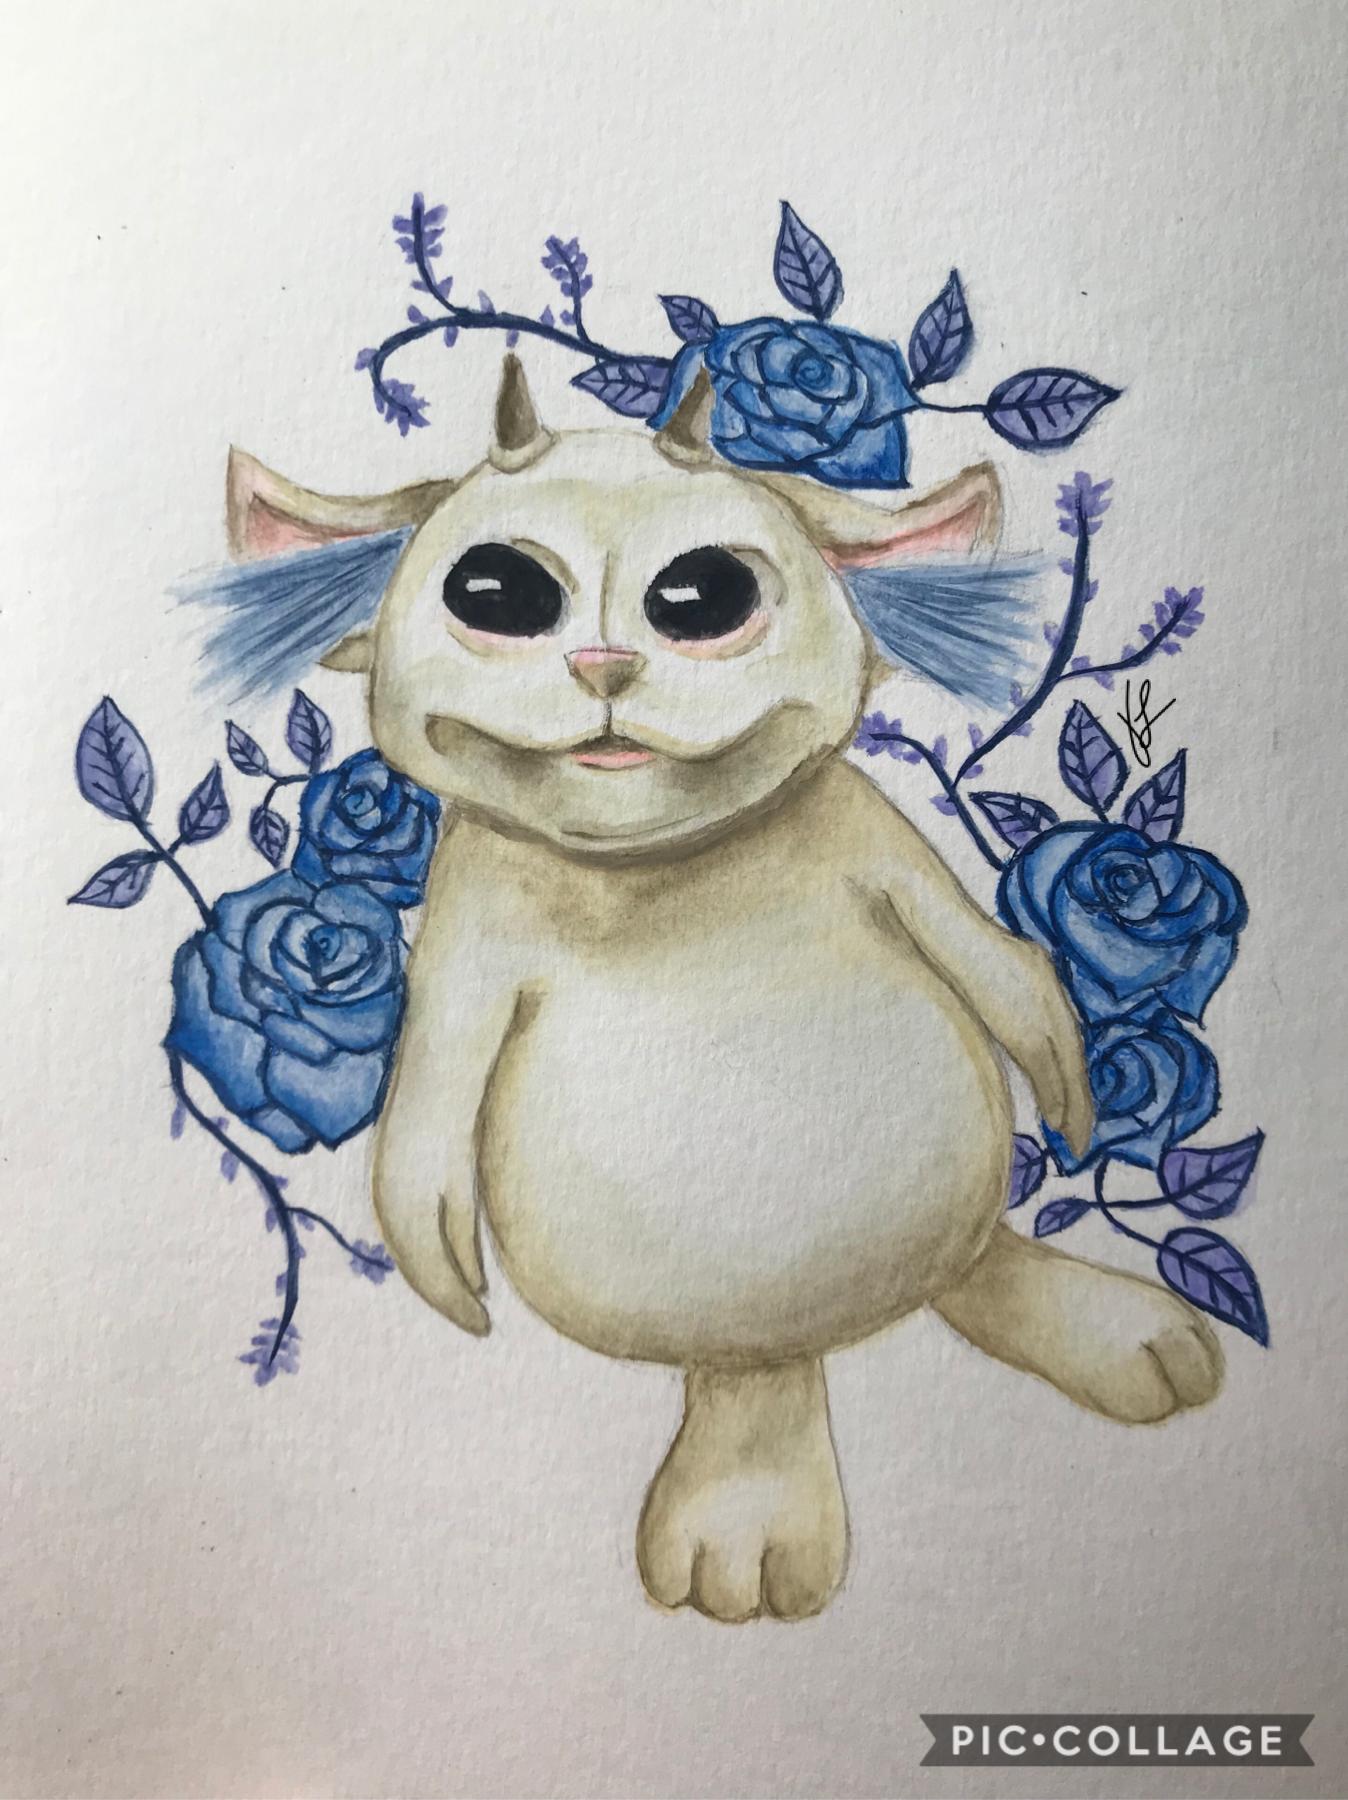 Finished Ned! We had blue roses as our wedding flower so this was fun :) I just wanted to fit the color scheme instead of doing yellow daisies 